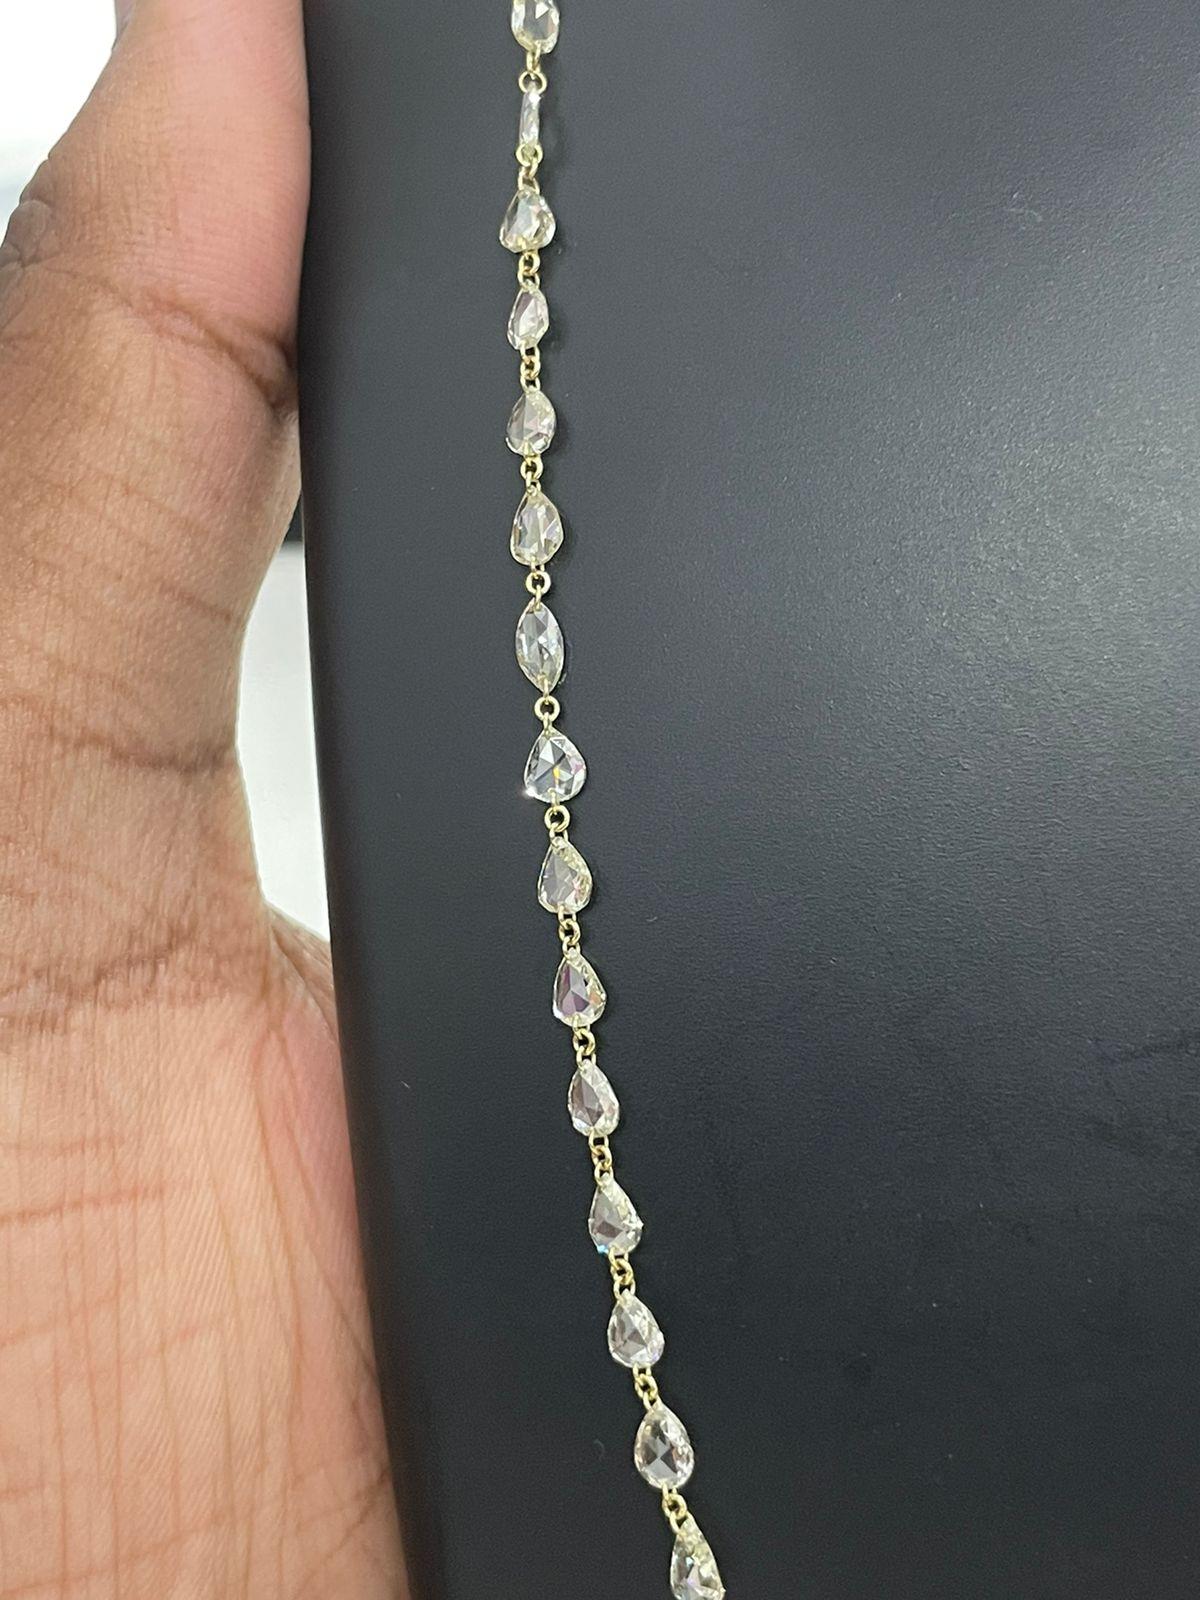 Panim 11.43 cts Fancy Rosecut Diamond Necklace in 18 Karat White Gold

In this necklace rosecut diamonds are evenly spaced on a white gold chain. This is a piece that can be worn everyday, alone or layered with other necklaces.

18K White Gold
11.43